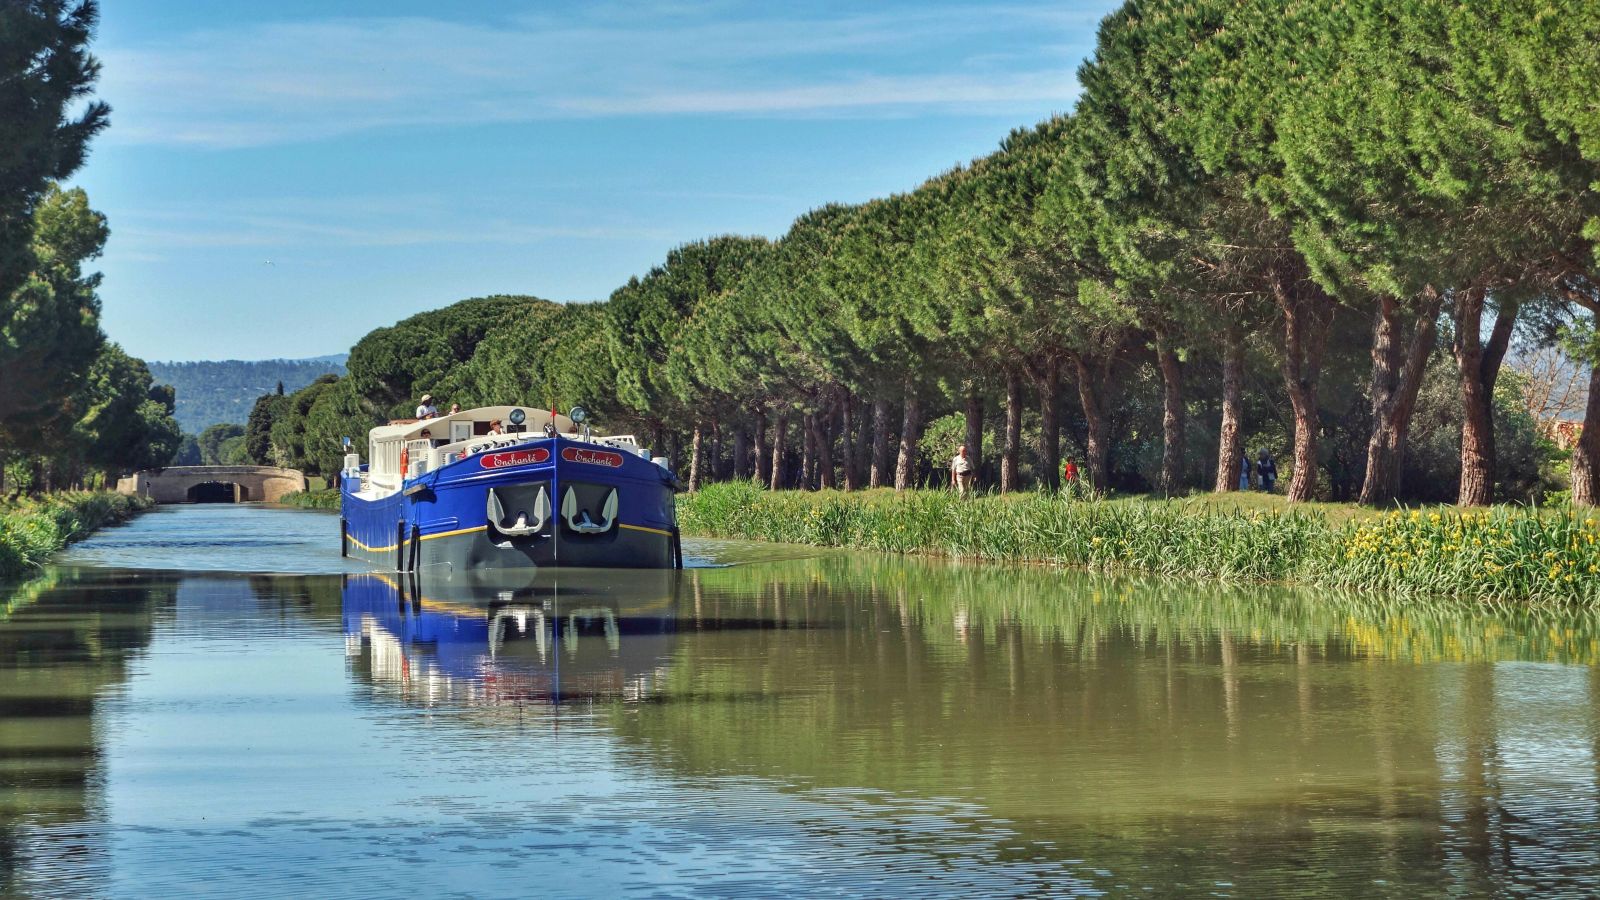 The Enchante barge sailing through the French countryside